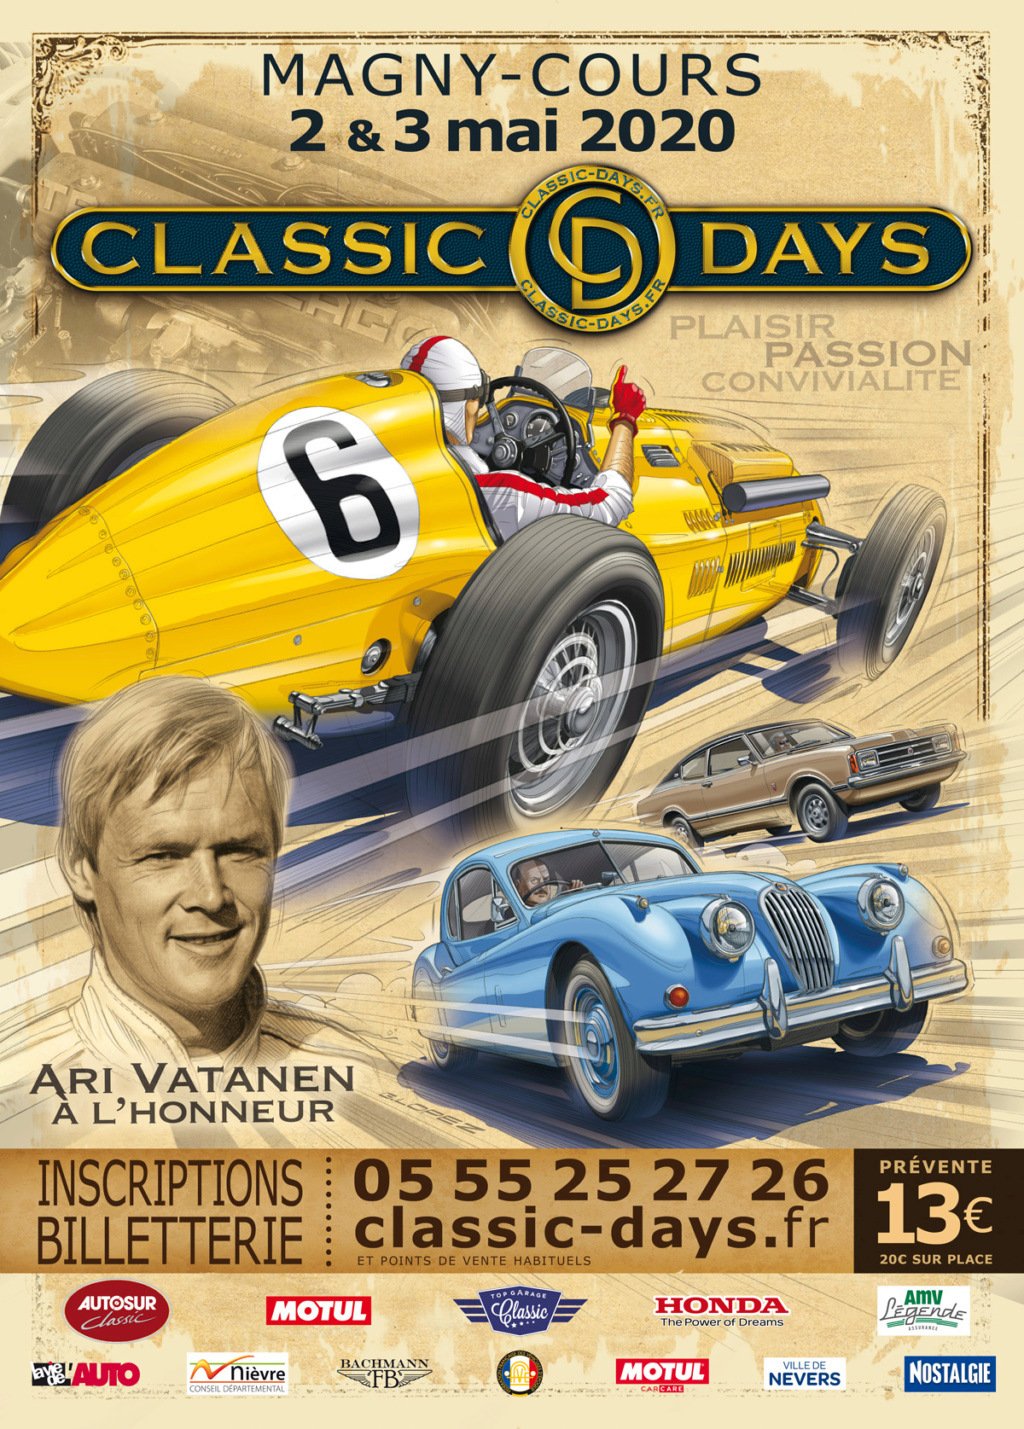 CLASSIC DAY'S MAGNY COURS 01/02 & 03 MAI 2020 Cd20-f11